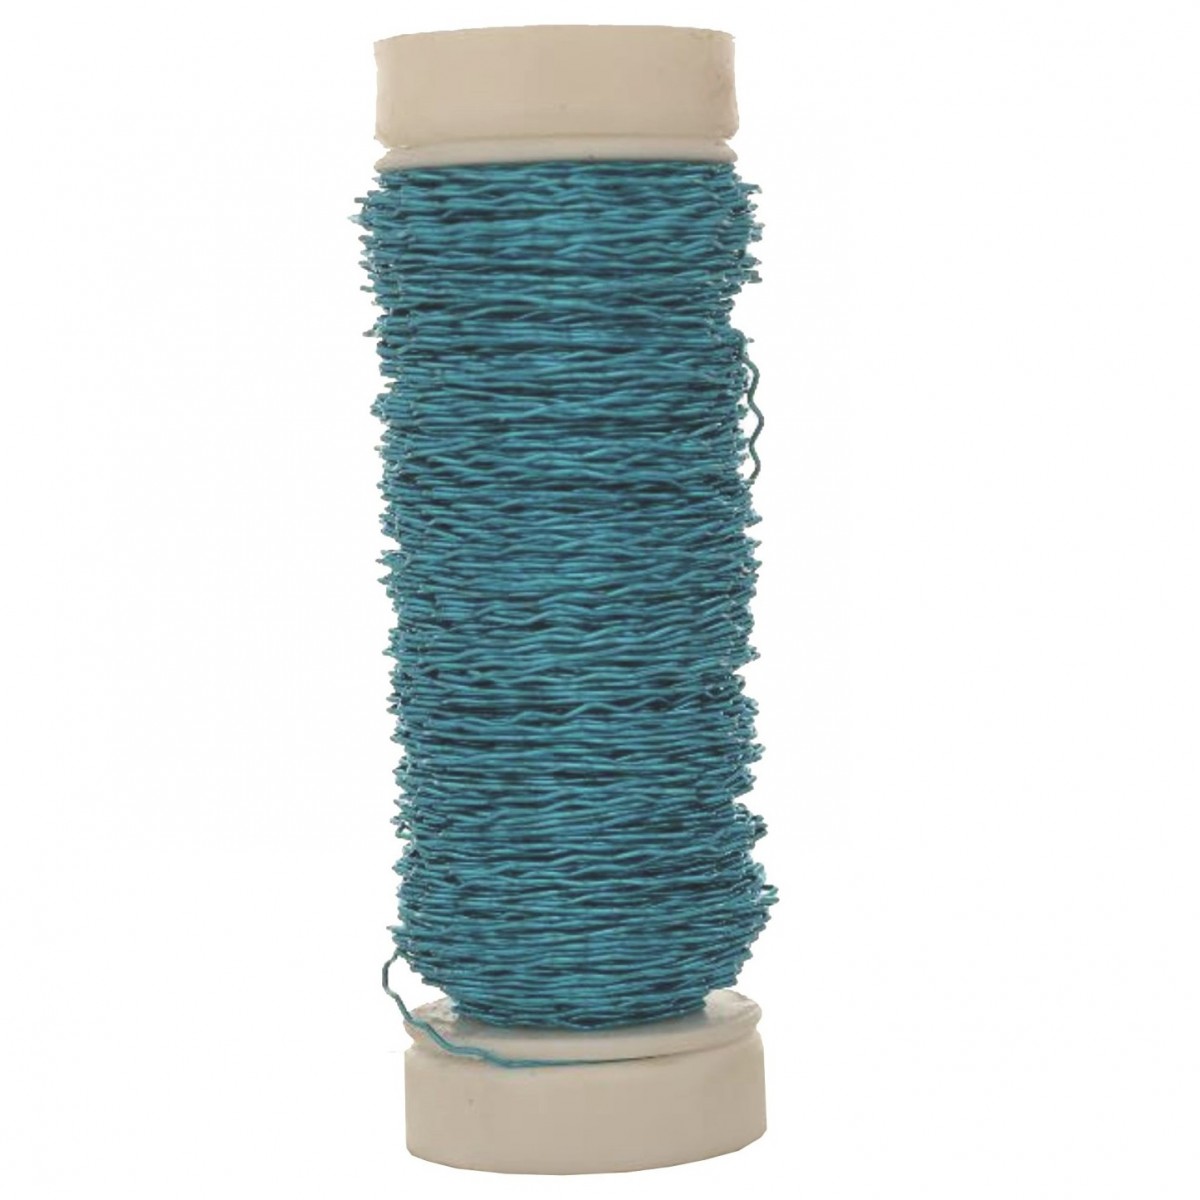 4047 Bullion Wire Turquoise 25gms 8mtr 1 No